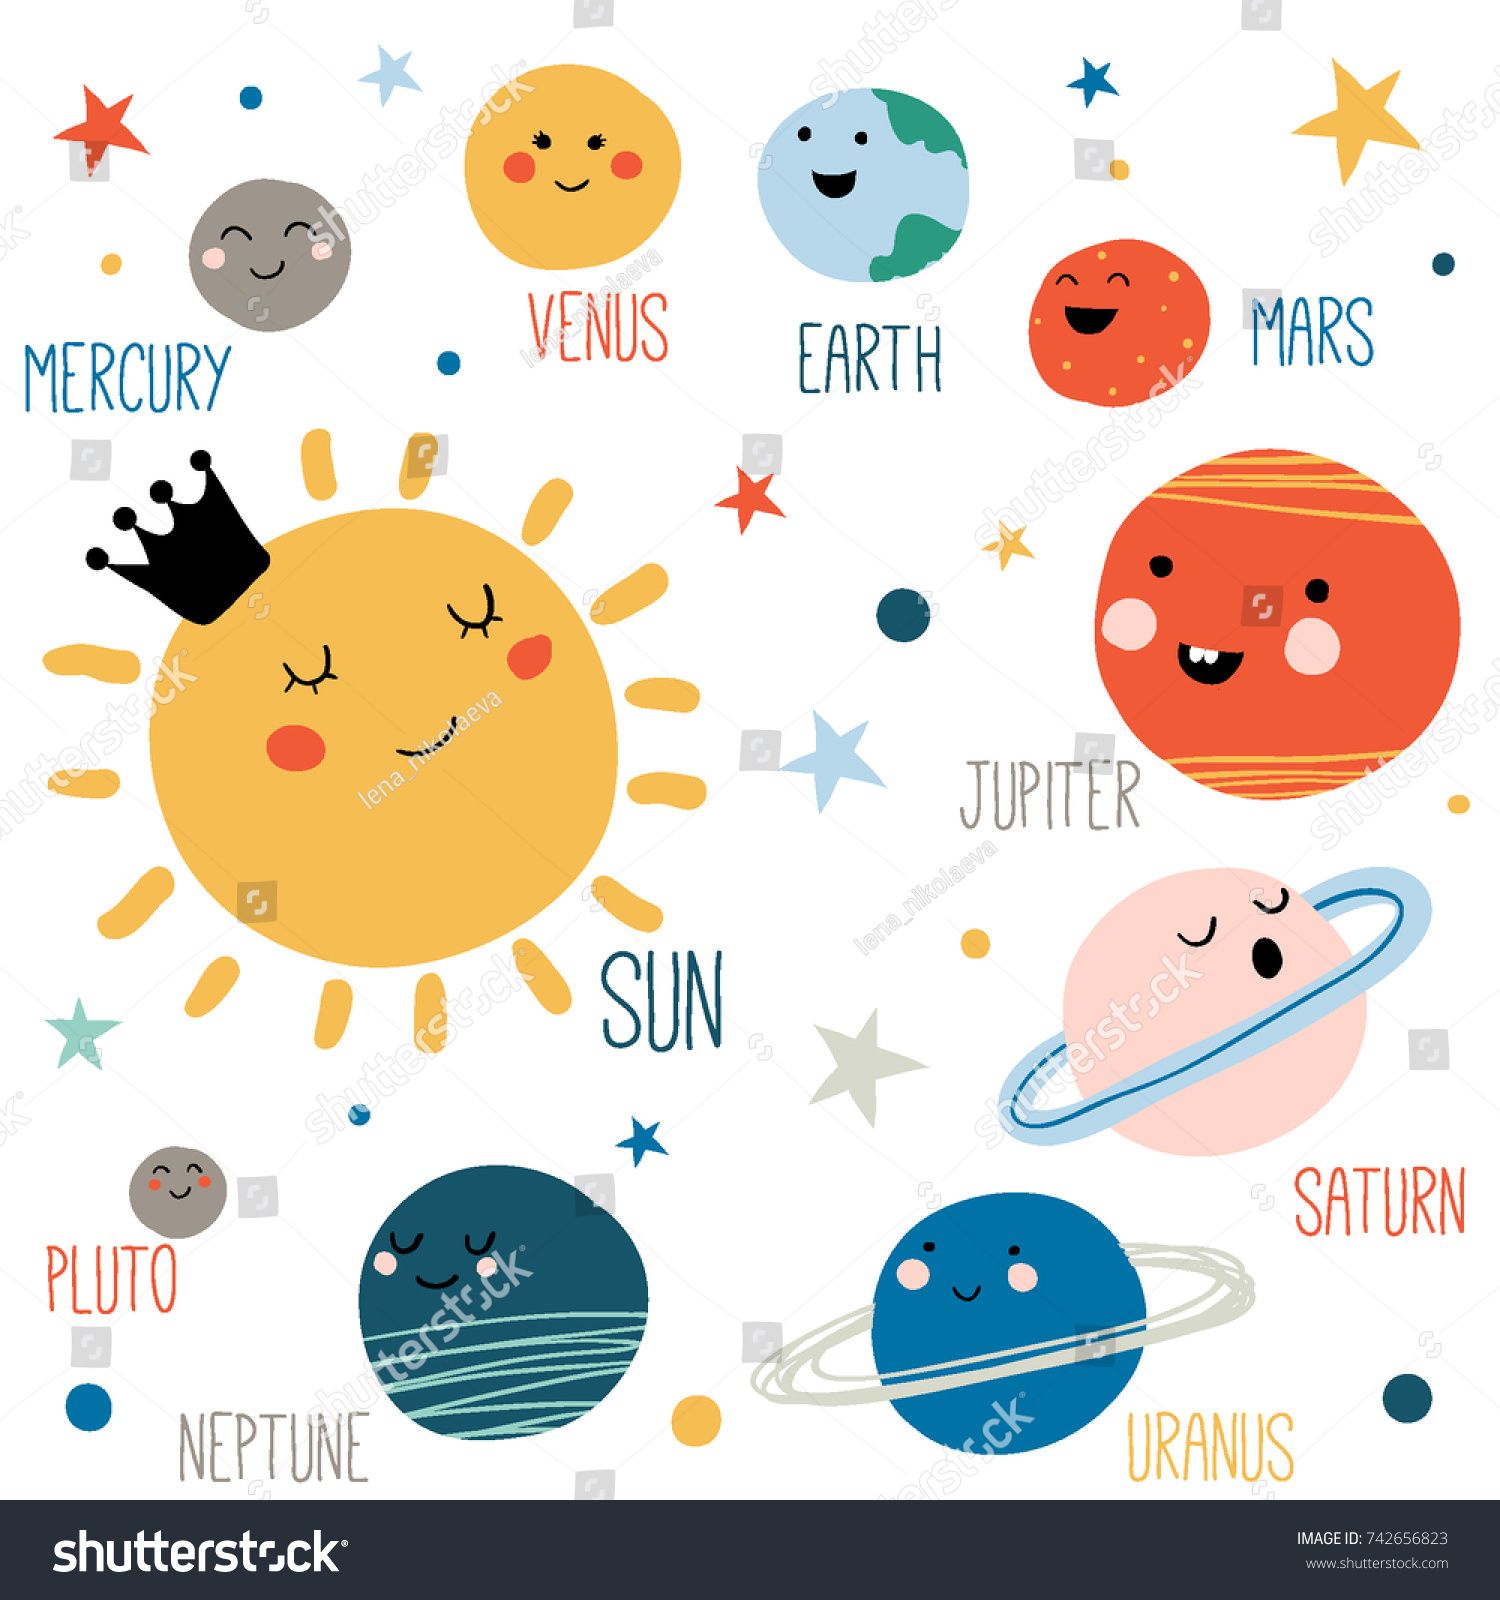 Jupiter clipart kid. Solar system with cute